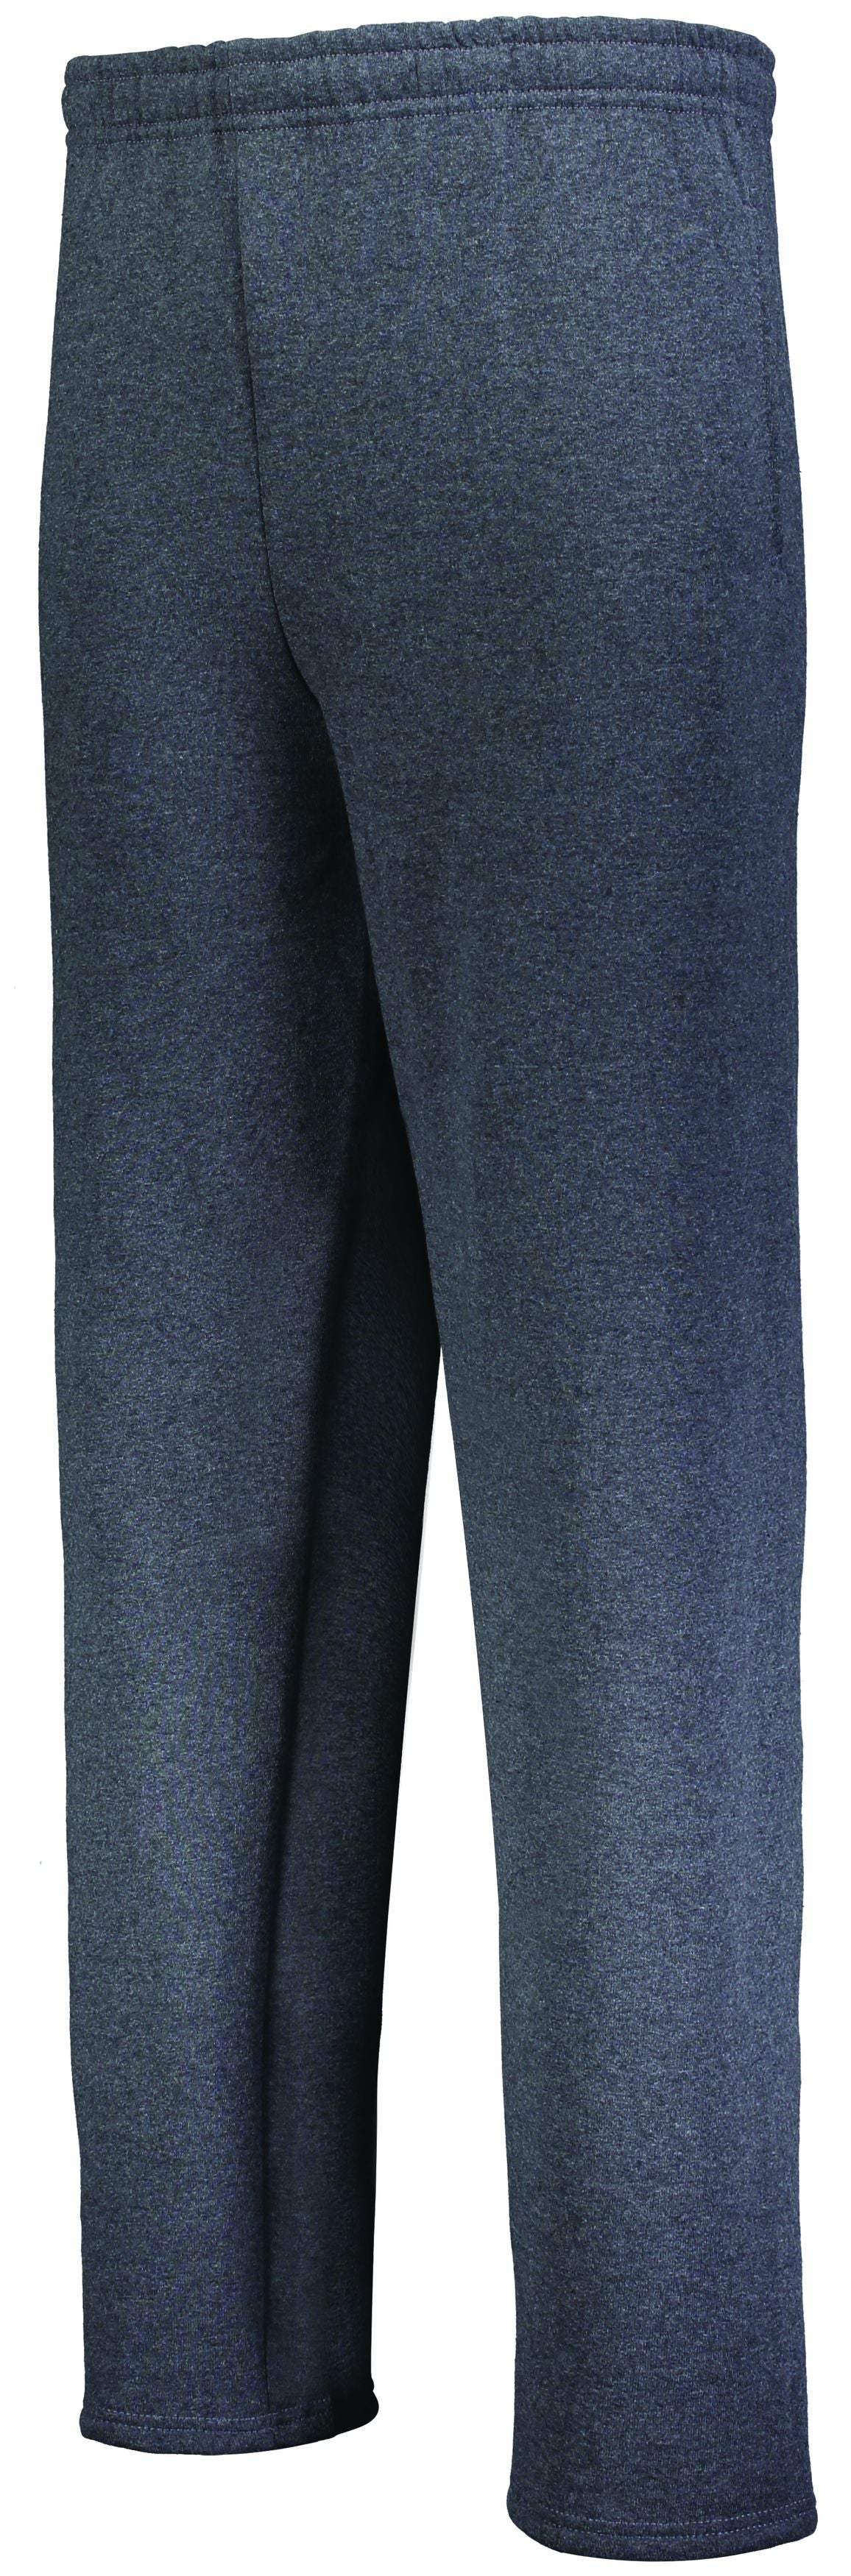 Russell Athletic Youth Dri-Power Open Bottom Pocket Sweatpant in Black Heather  -Part of the Youth, Youth-Pants, Pants, Russell-Athletic-Products product lines at KanaleyCreations.com